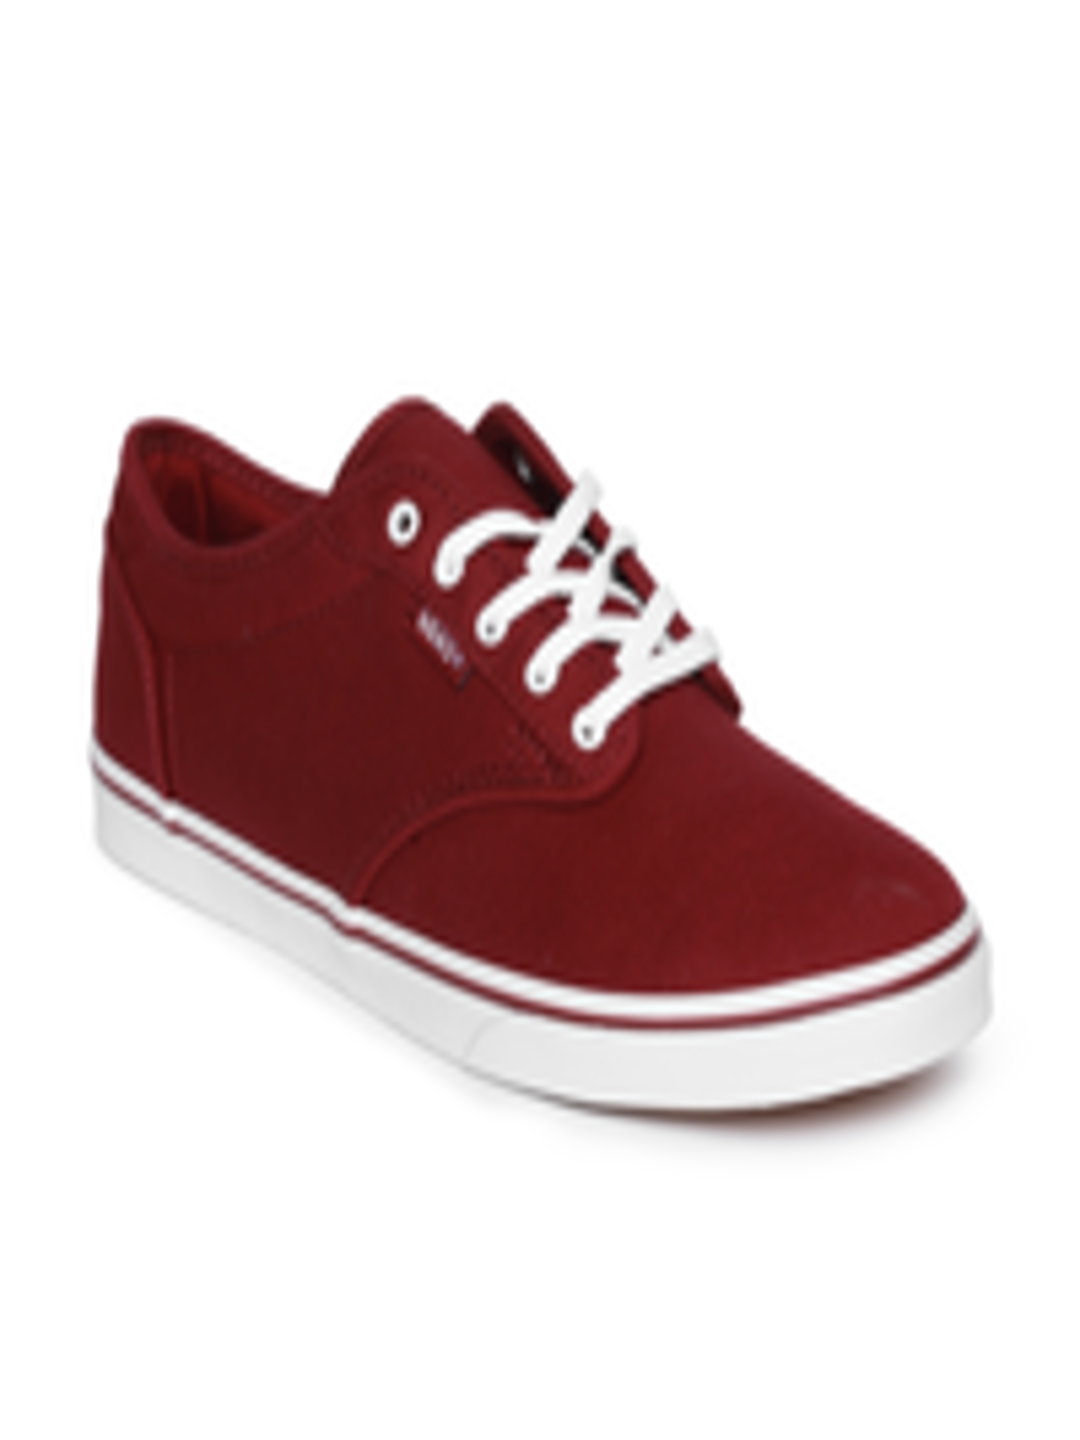 Buy Vans Women Red Sneakers - Casual Shoes for Women 2505680 | Myntra Red Vans Shoes For Girls